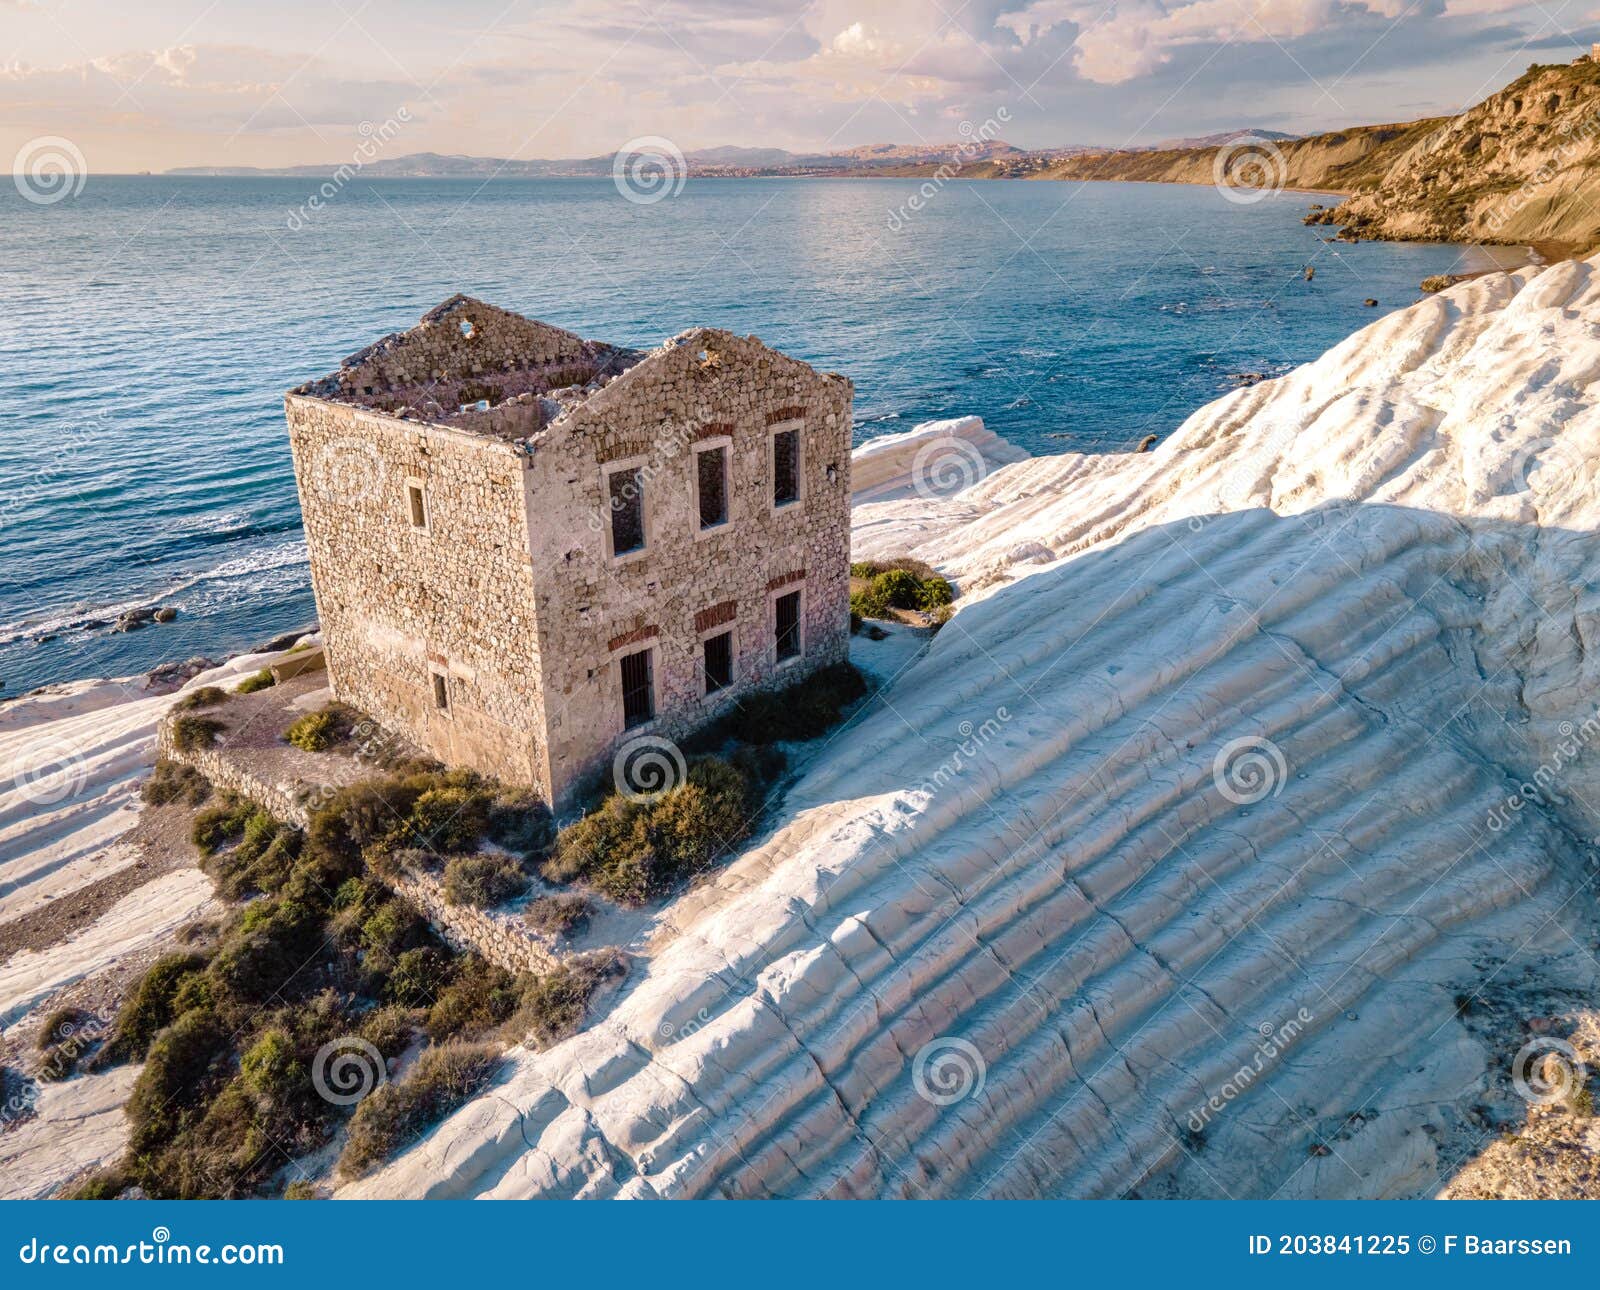 punta bianca, agrigento in sicily italy white beach with old ruins of abandoned stone house on white cliffs